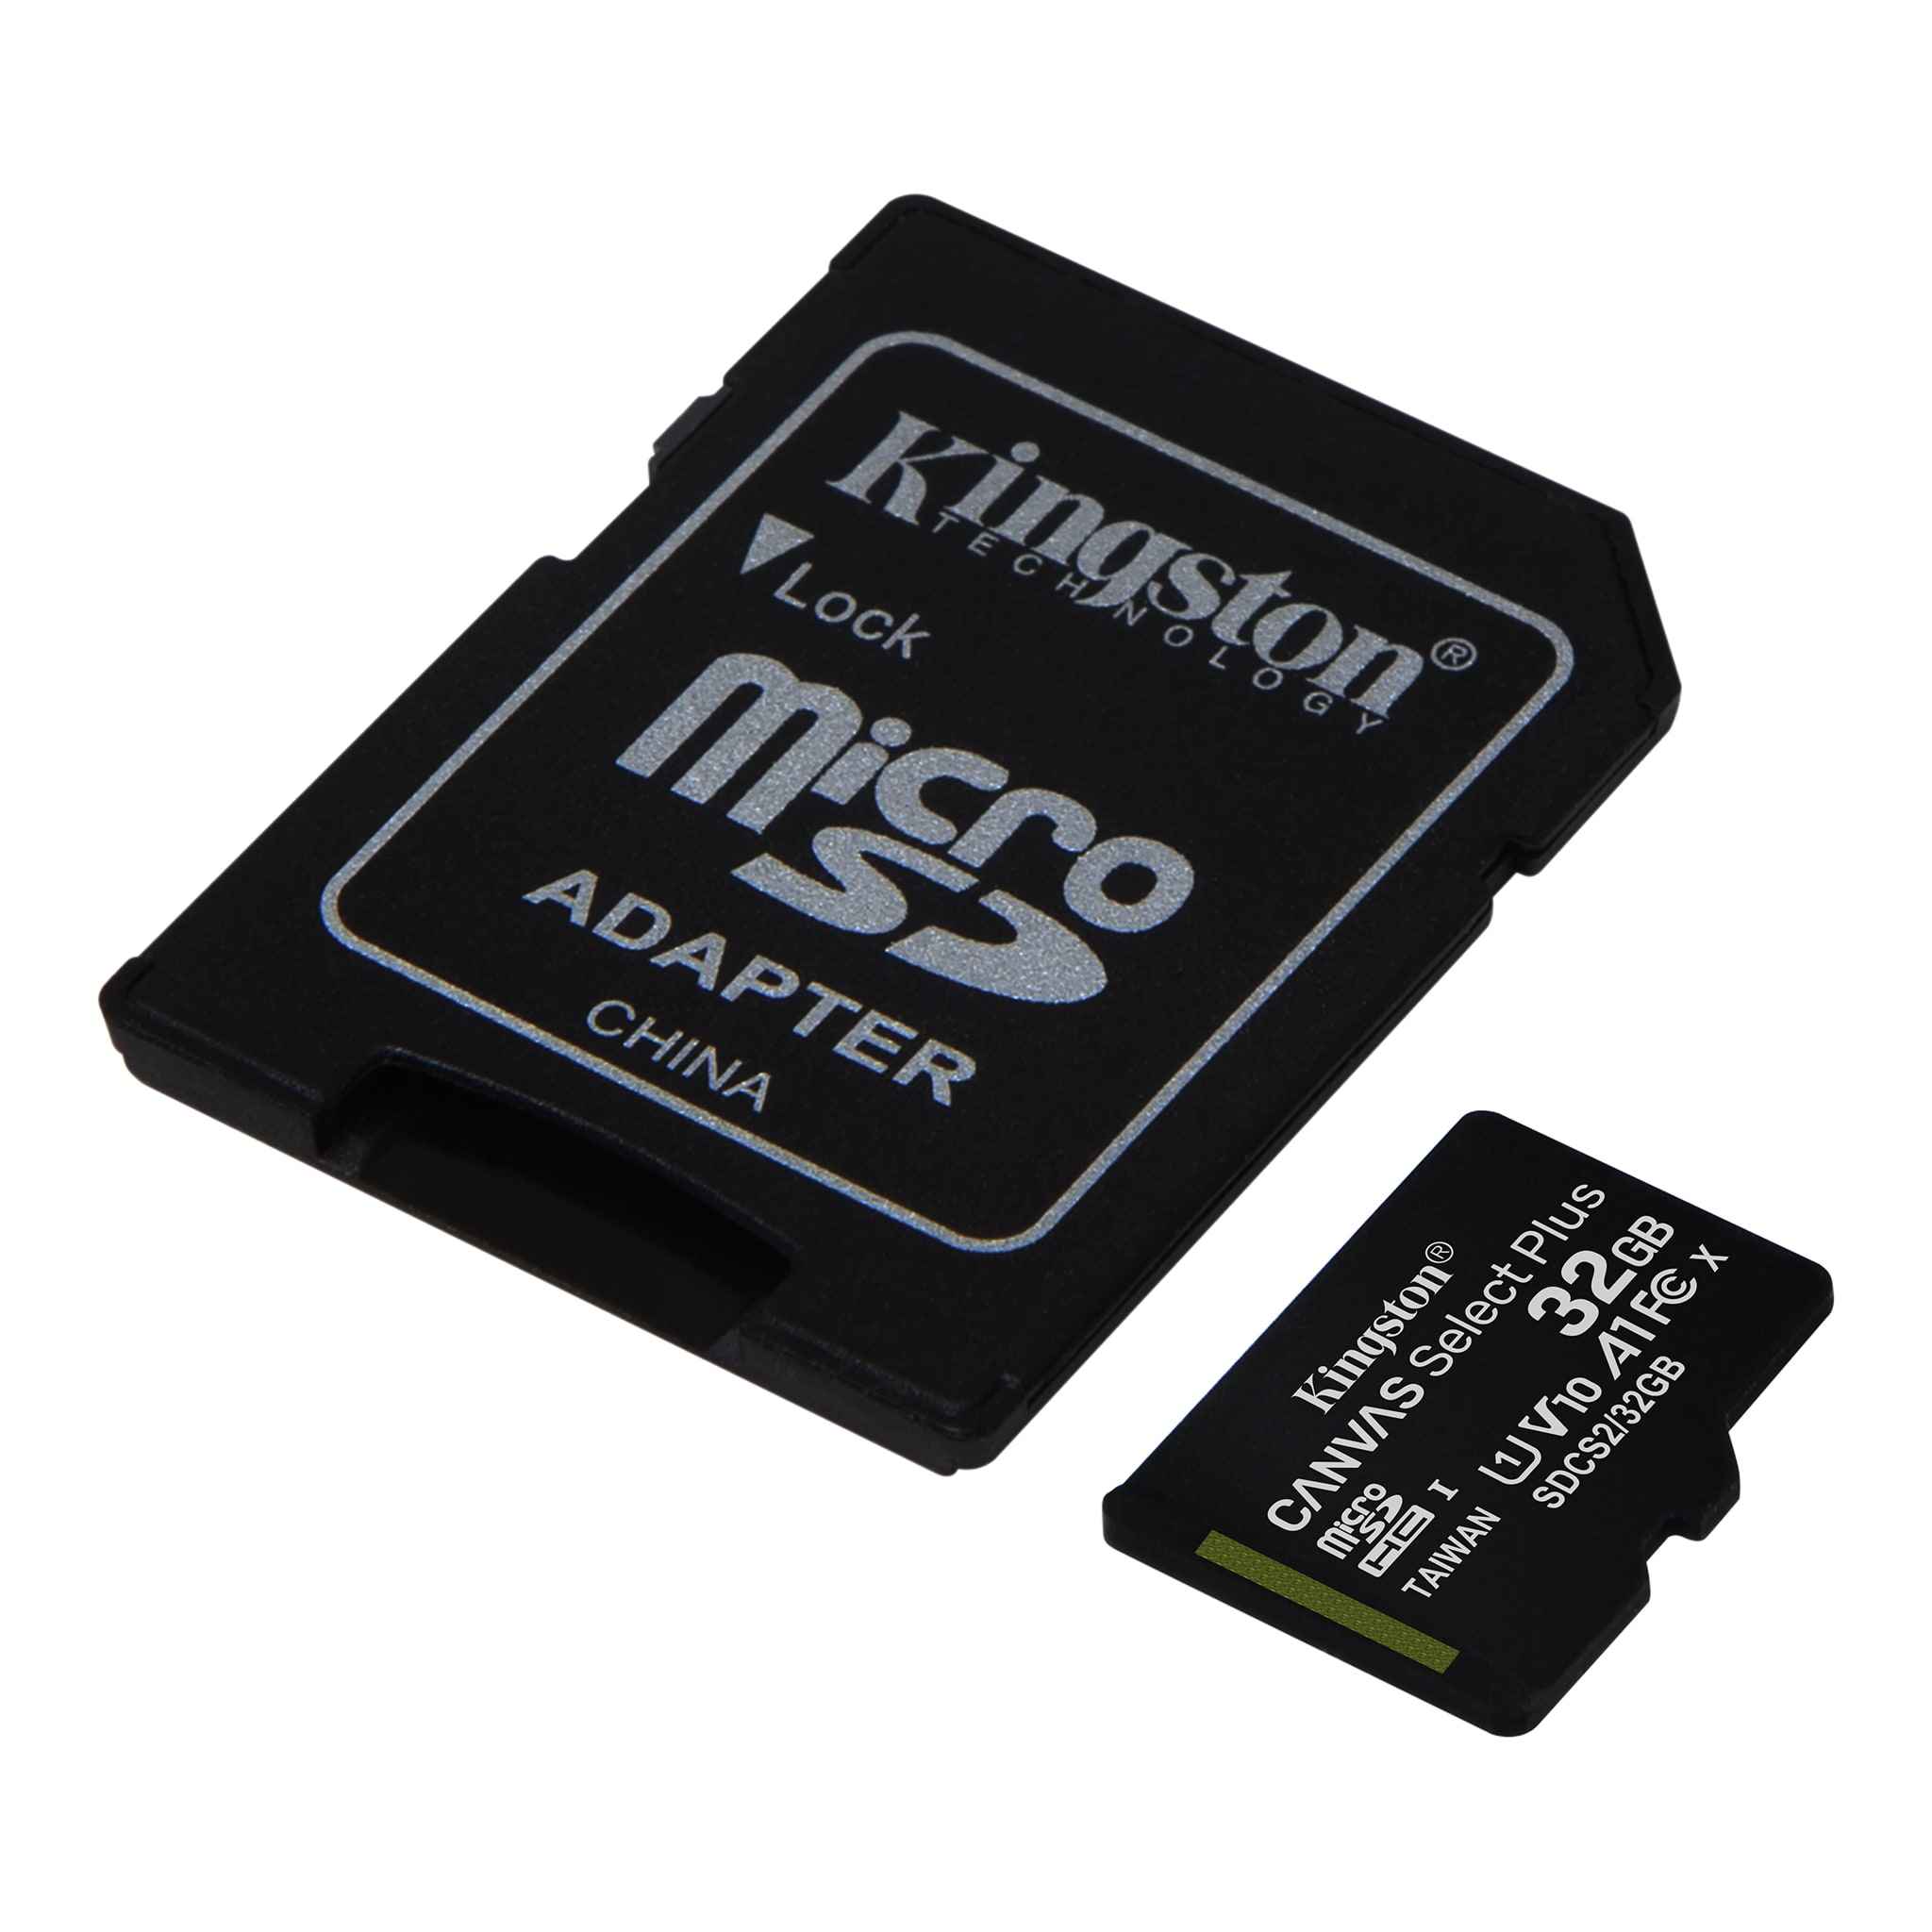 Kingston 64GB Nokia 301 MicroSDXC Canvas Select Plus Card Verified by SanFlash. 100MBs Works with Kingston 